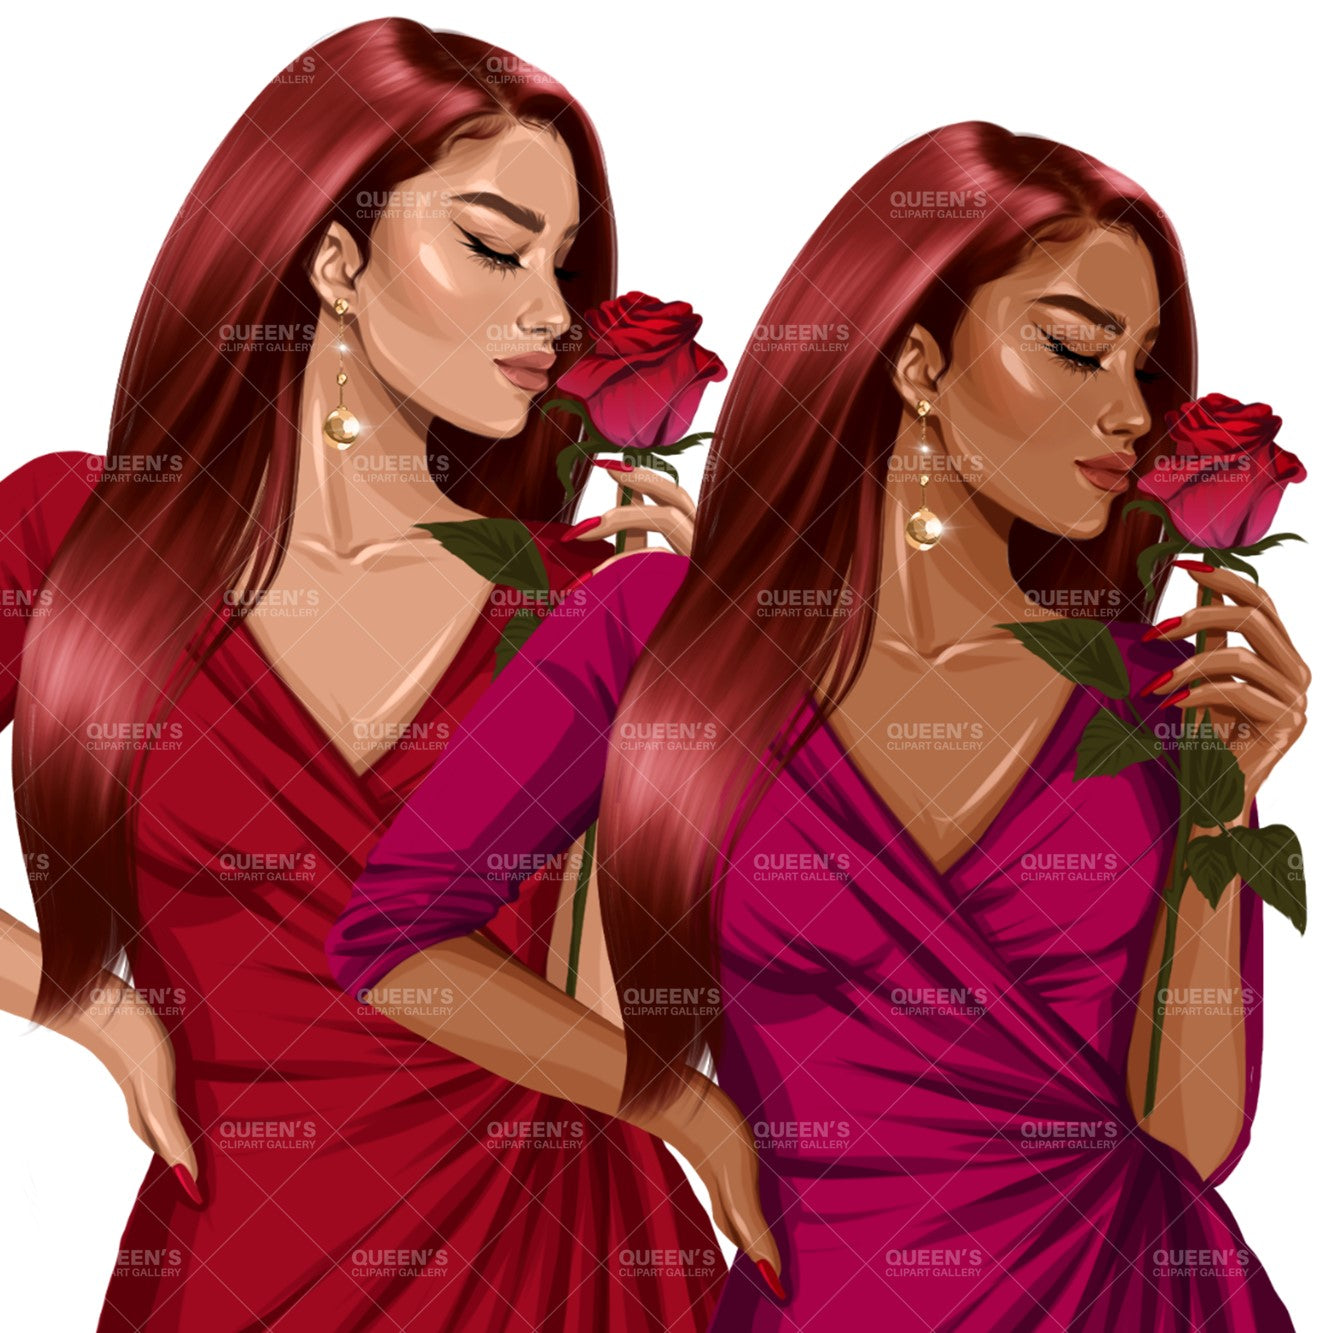 Valentine's Day rose, Woman in red dress, Valentine clipart, Fashion Illustration, Fashion girl png, Red rose, Love, Girl boss planner